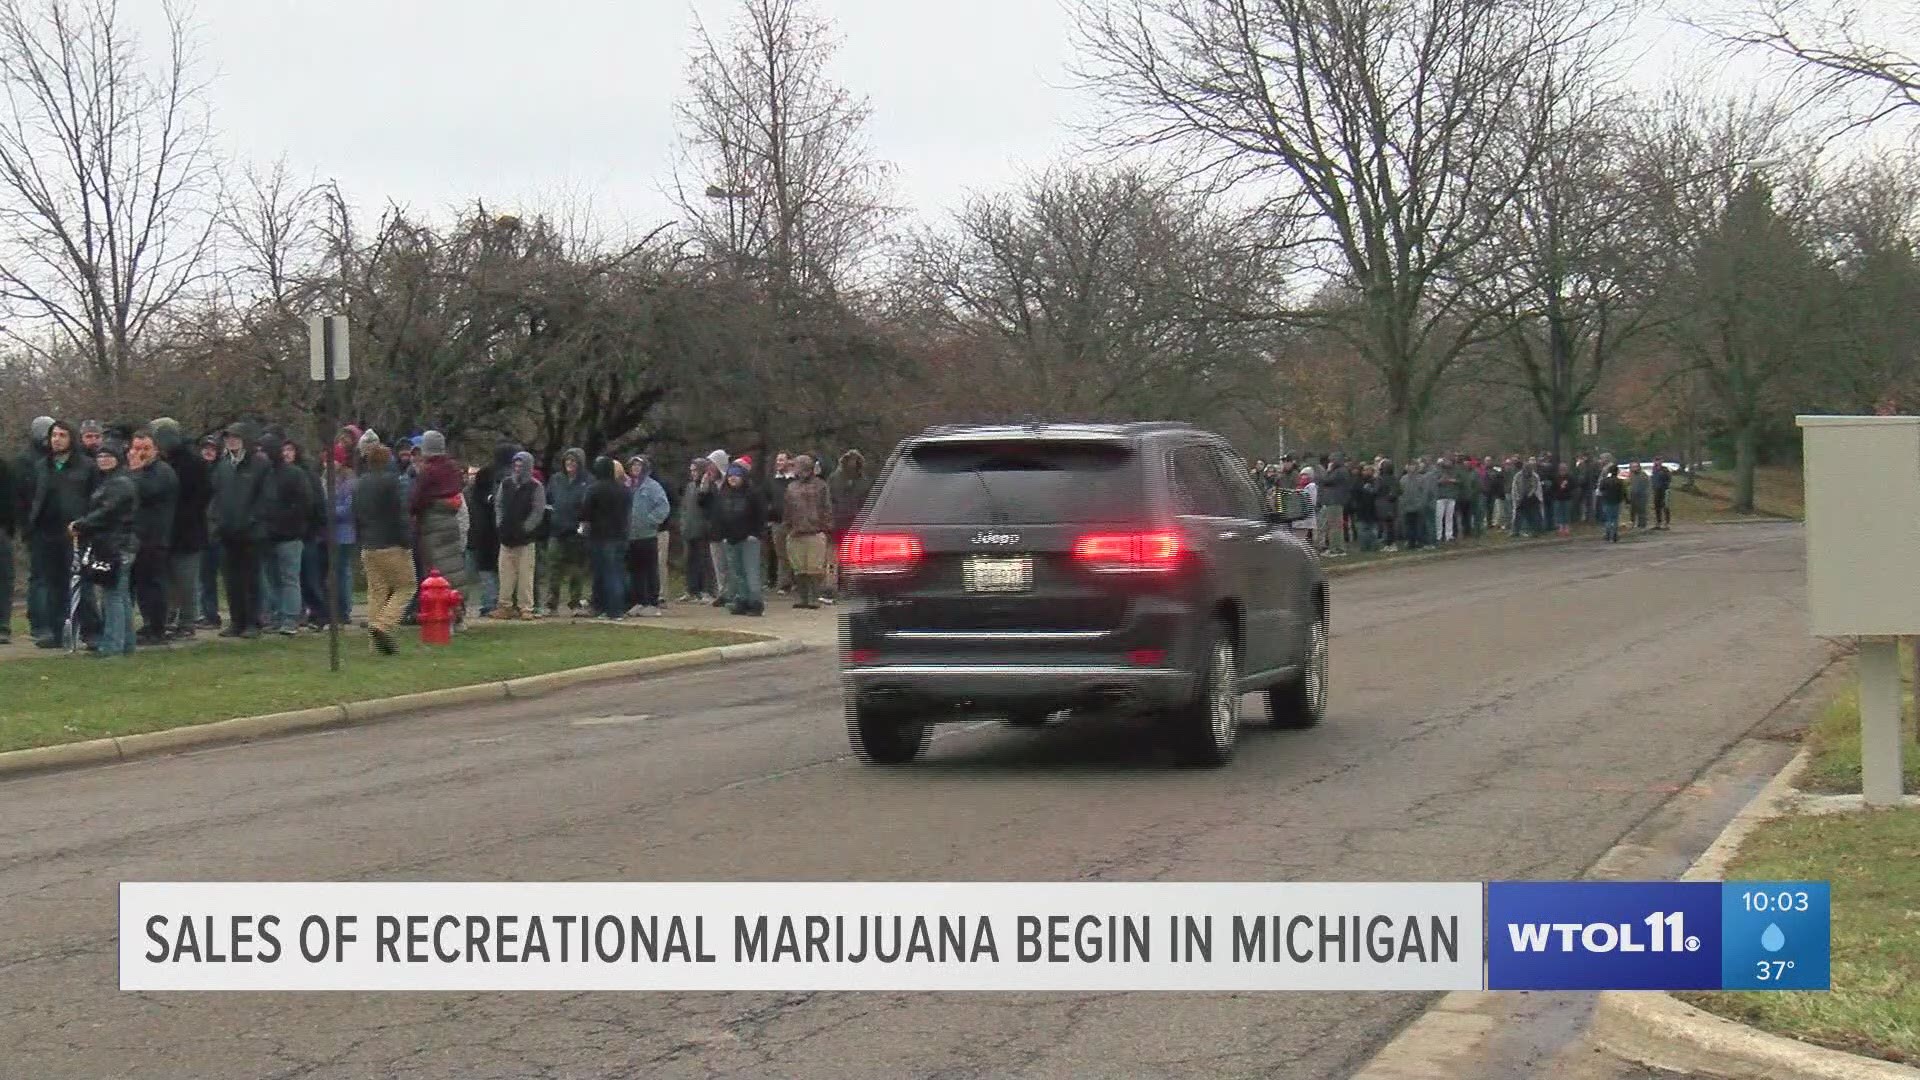 Thousands lined up to be the first customers to buy recreational marijuana in Ann Arbor, Michigan.